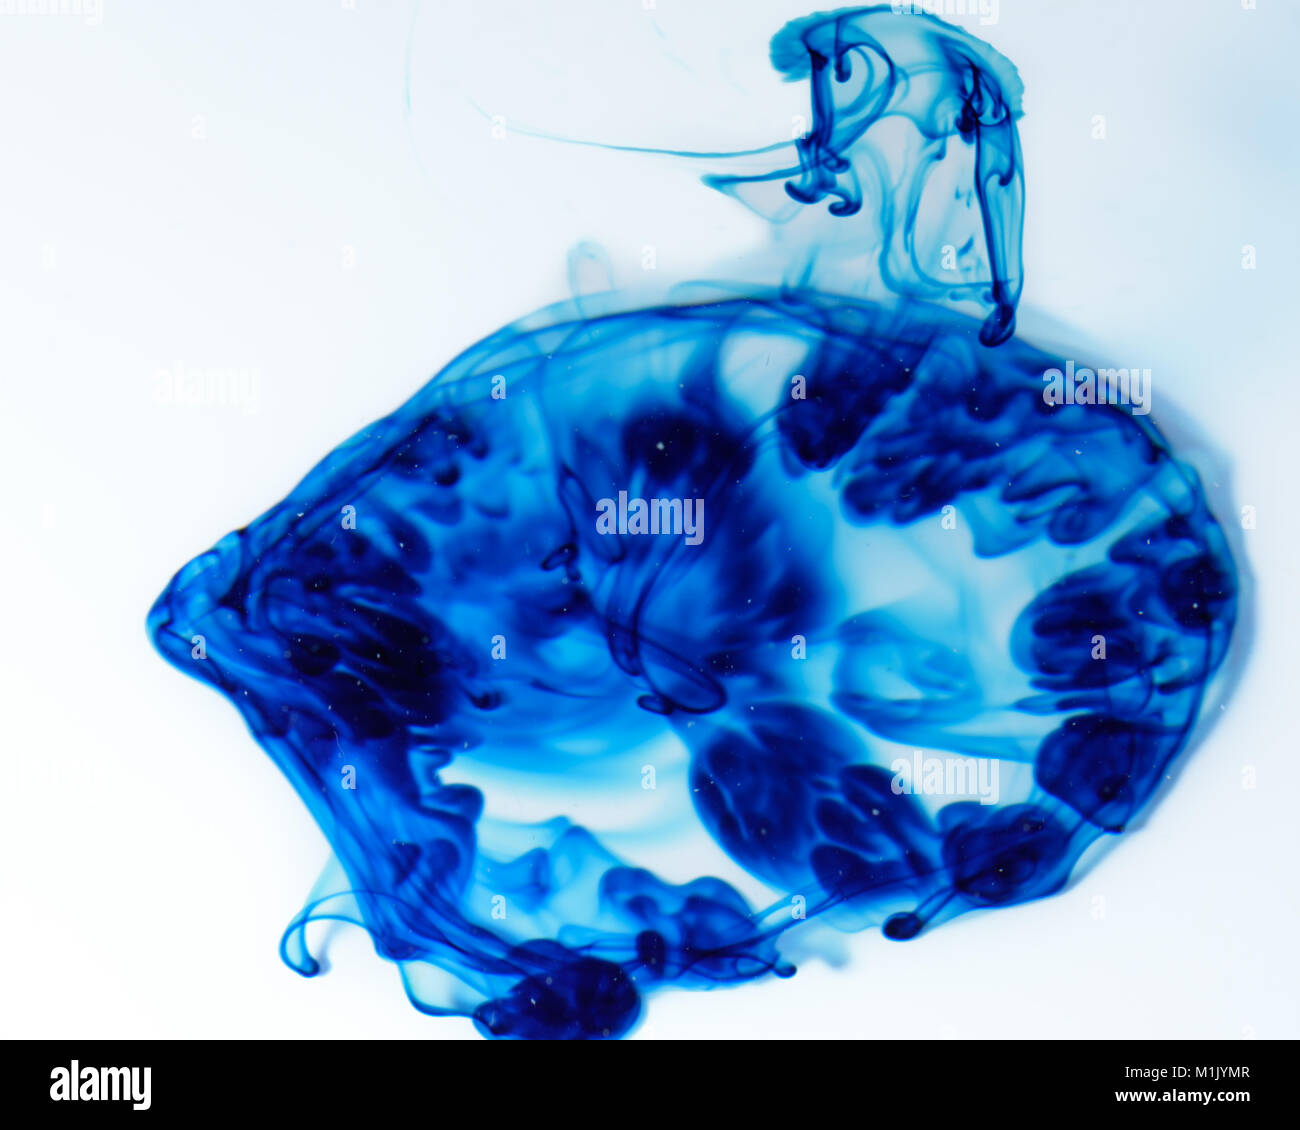 Blue food coloring dispersing in water against a white background. Stock Photo